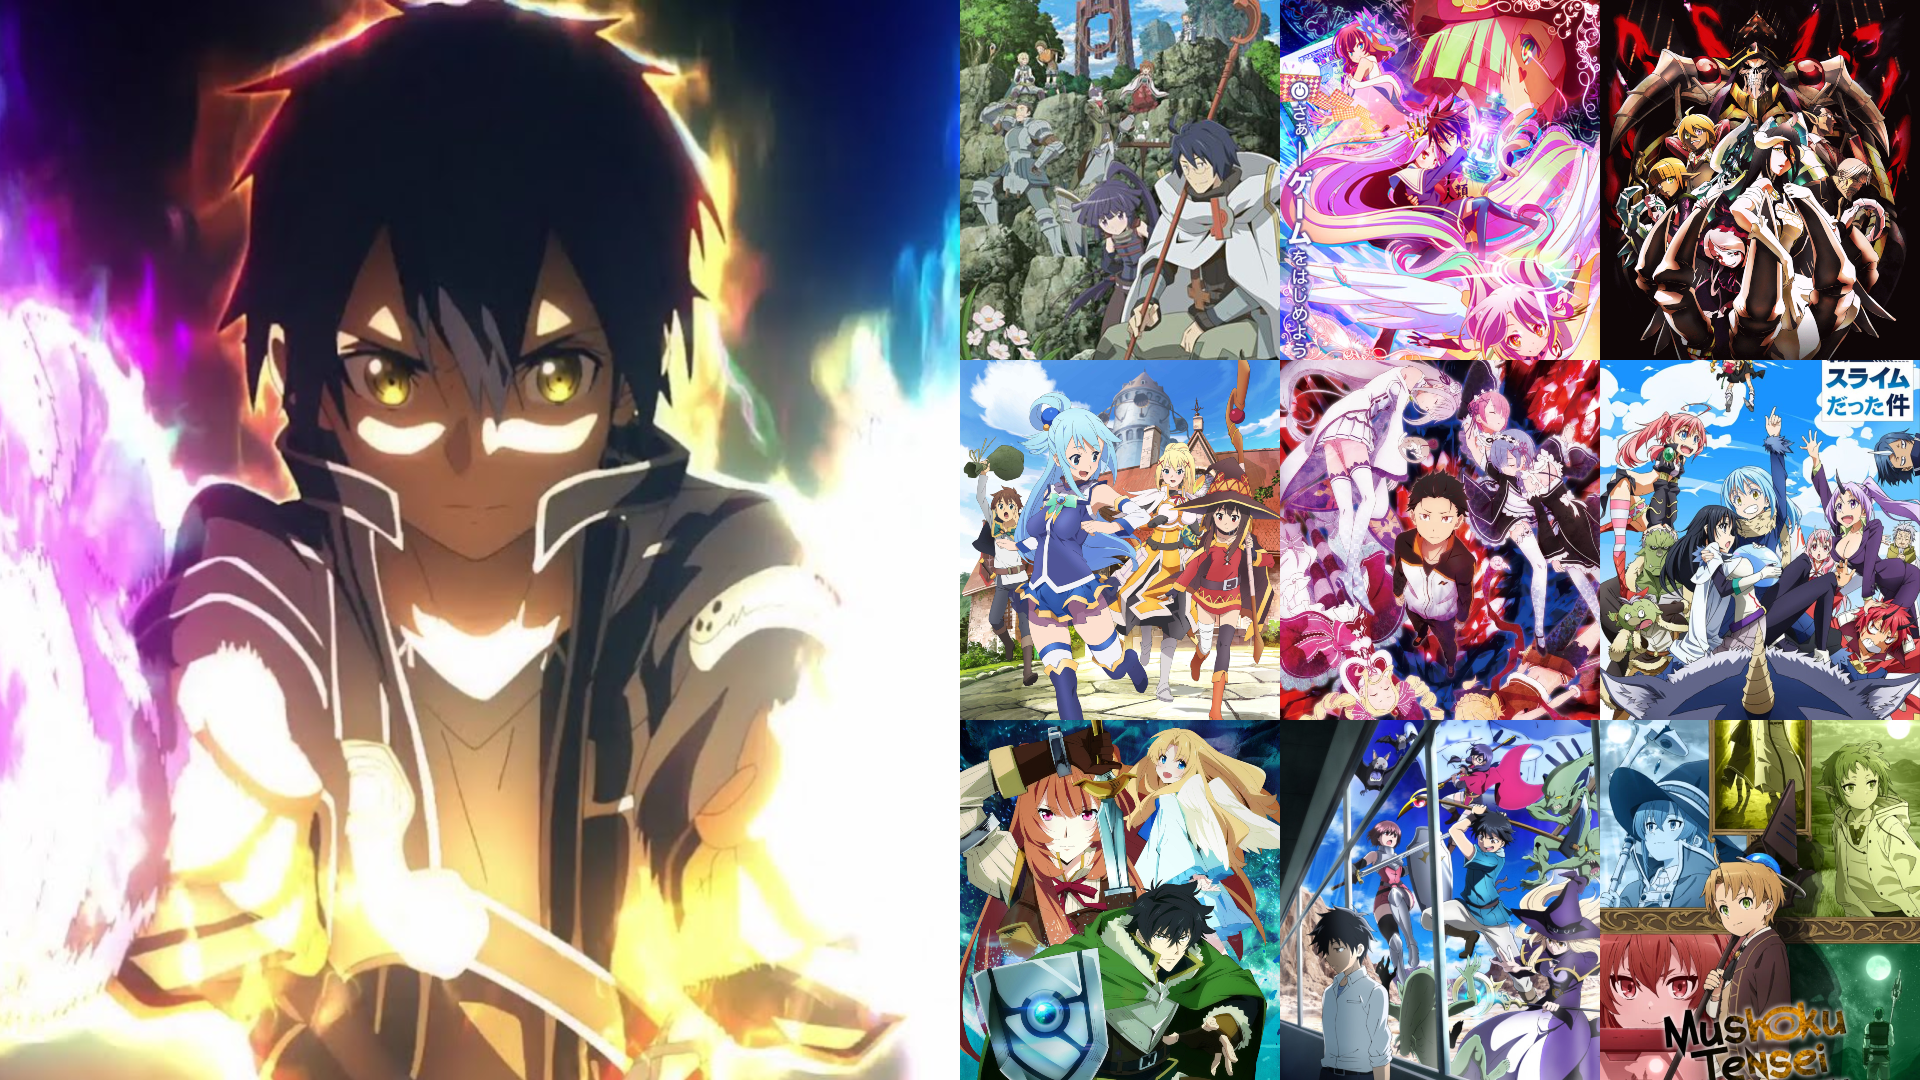 Why Sword Art Online Fans Have Come to Love Isekai